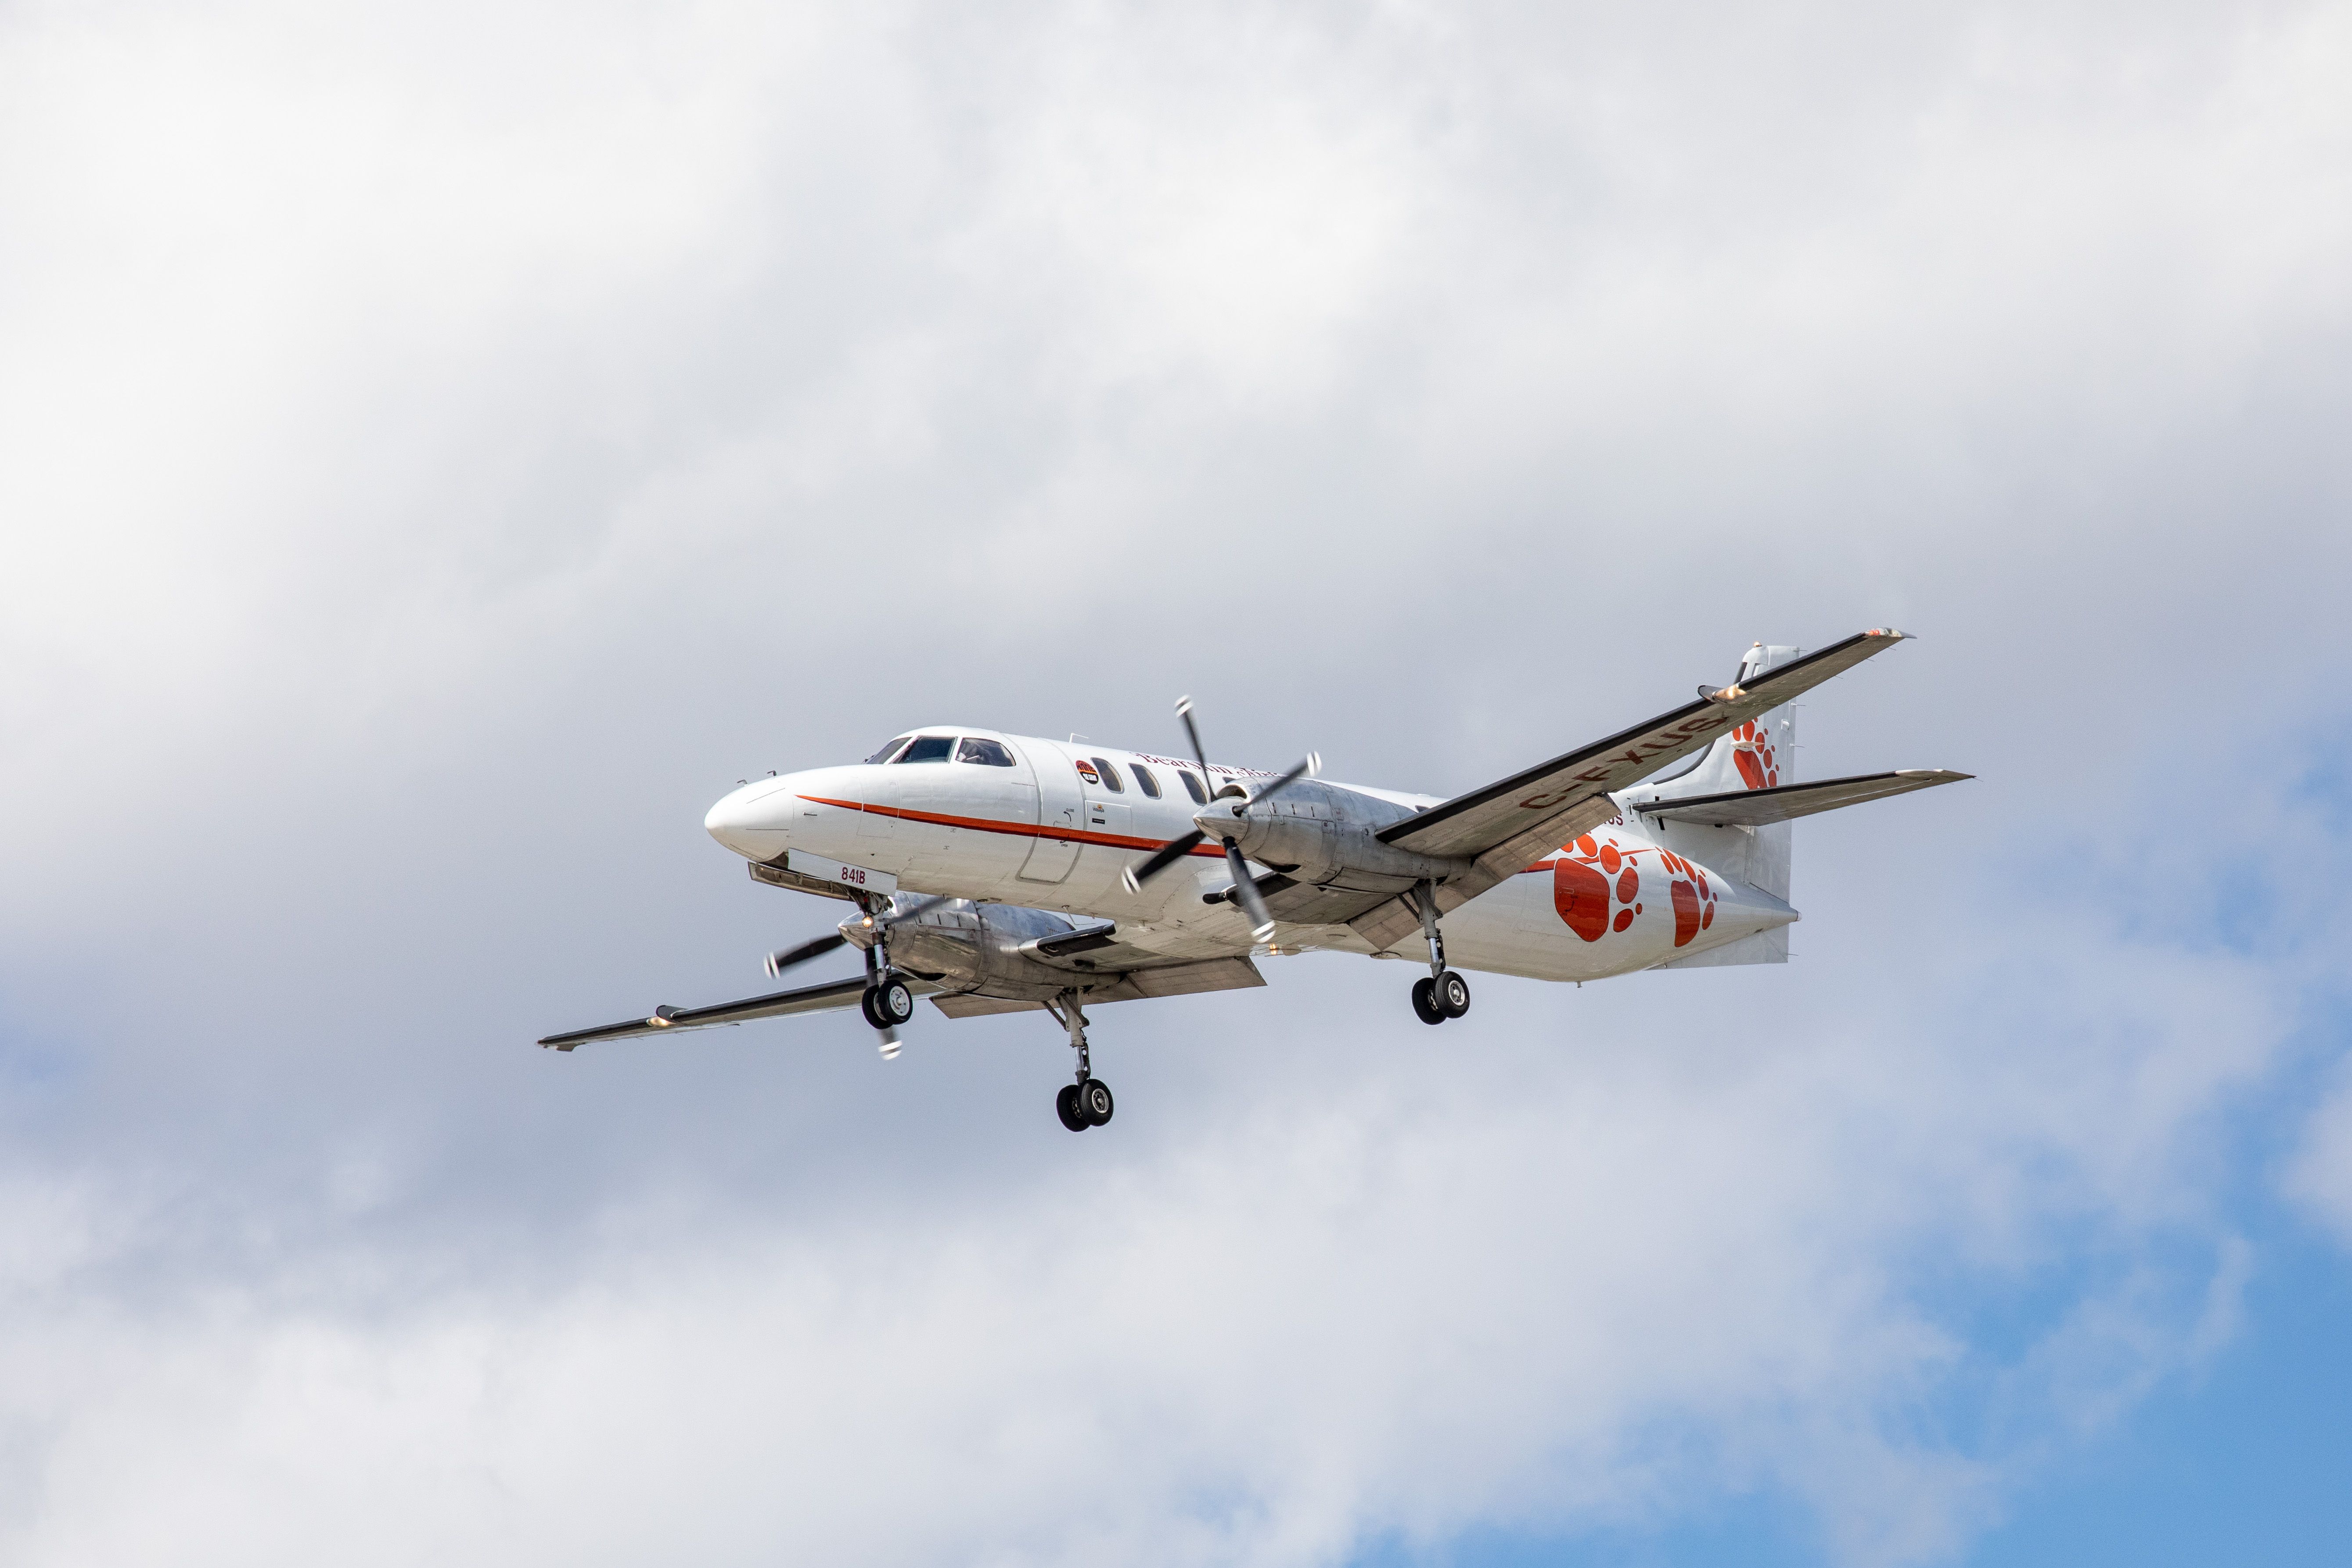 A Bearskin Airlines Fairchild Metroliner approaching Pearson Airport in Toronto 